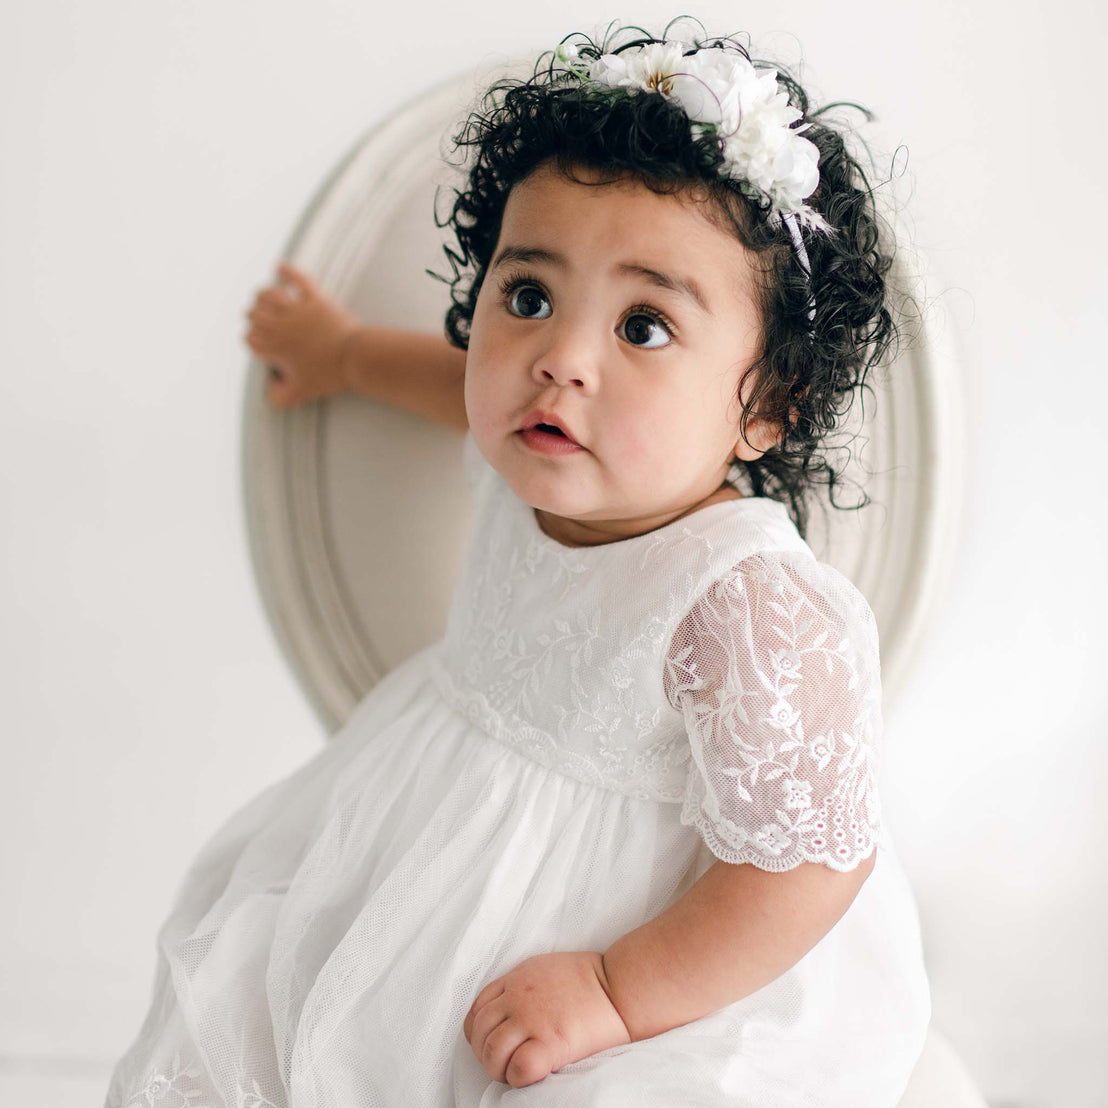 A toddler with curly hair and a floral headband wears a delicate Lilly romper dress made of floral embroidered netting lace, sitting in front of a round white backdrop, looking upwards with wide eyes.